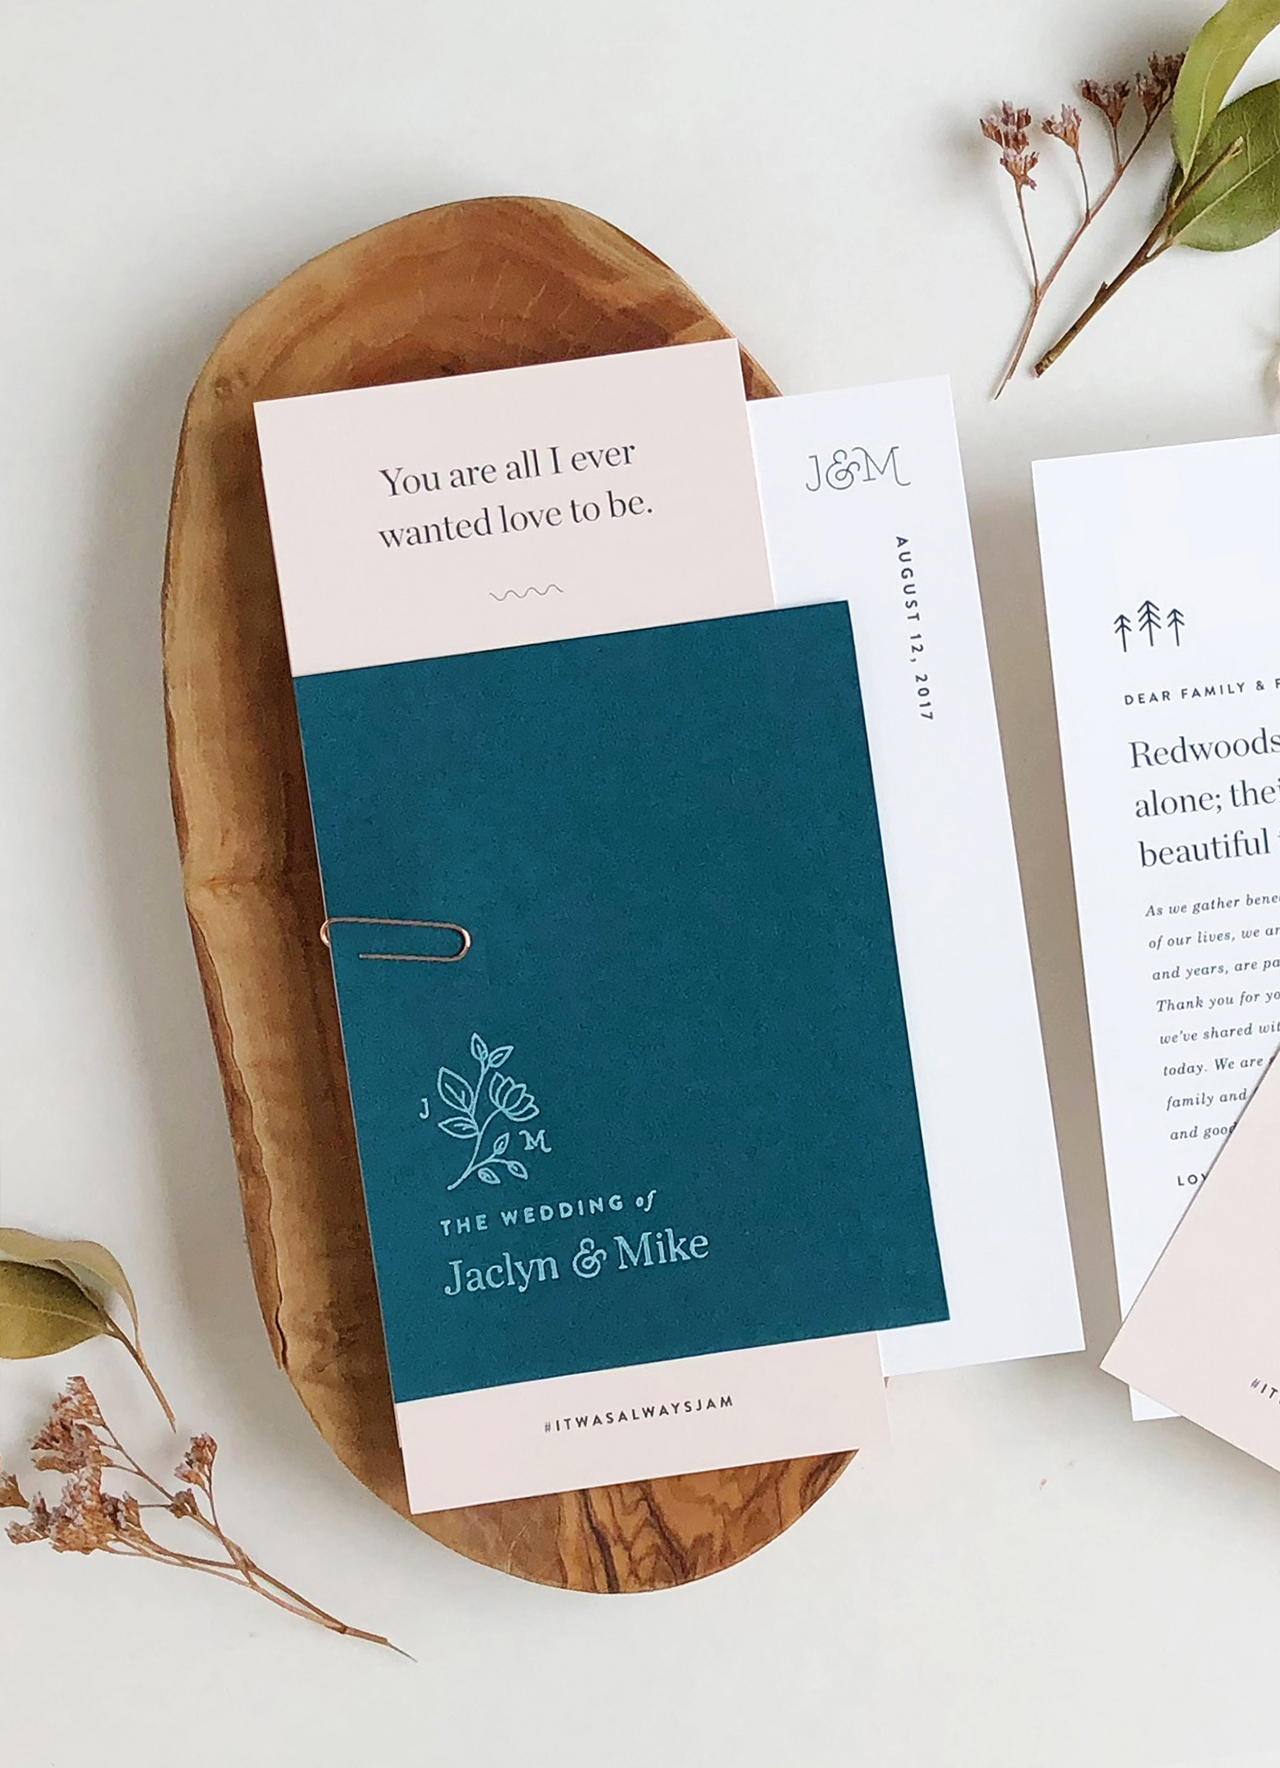 Understated Teal and Blush Wedding Invitations by Design by Jaclyn